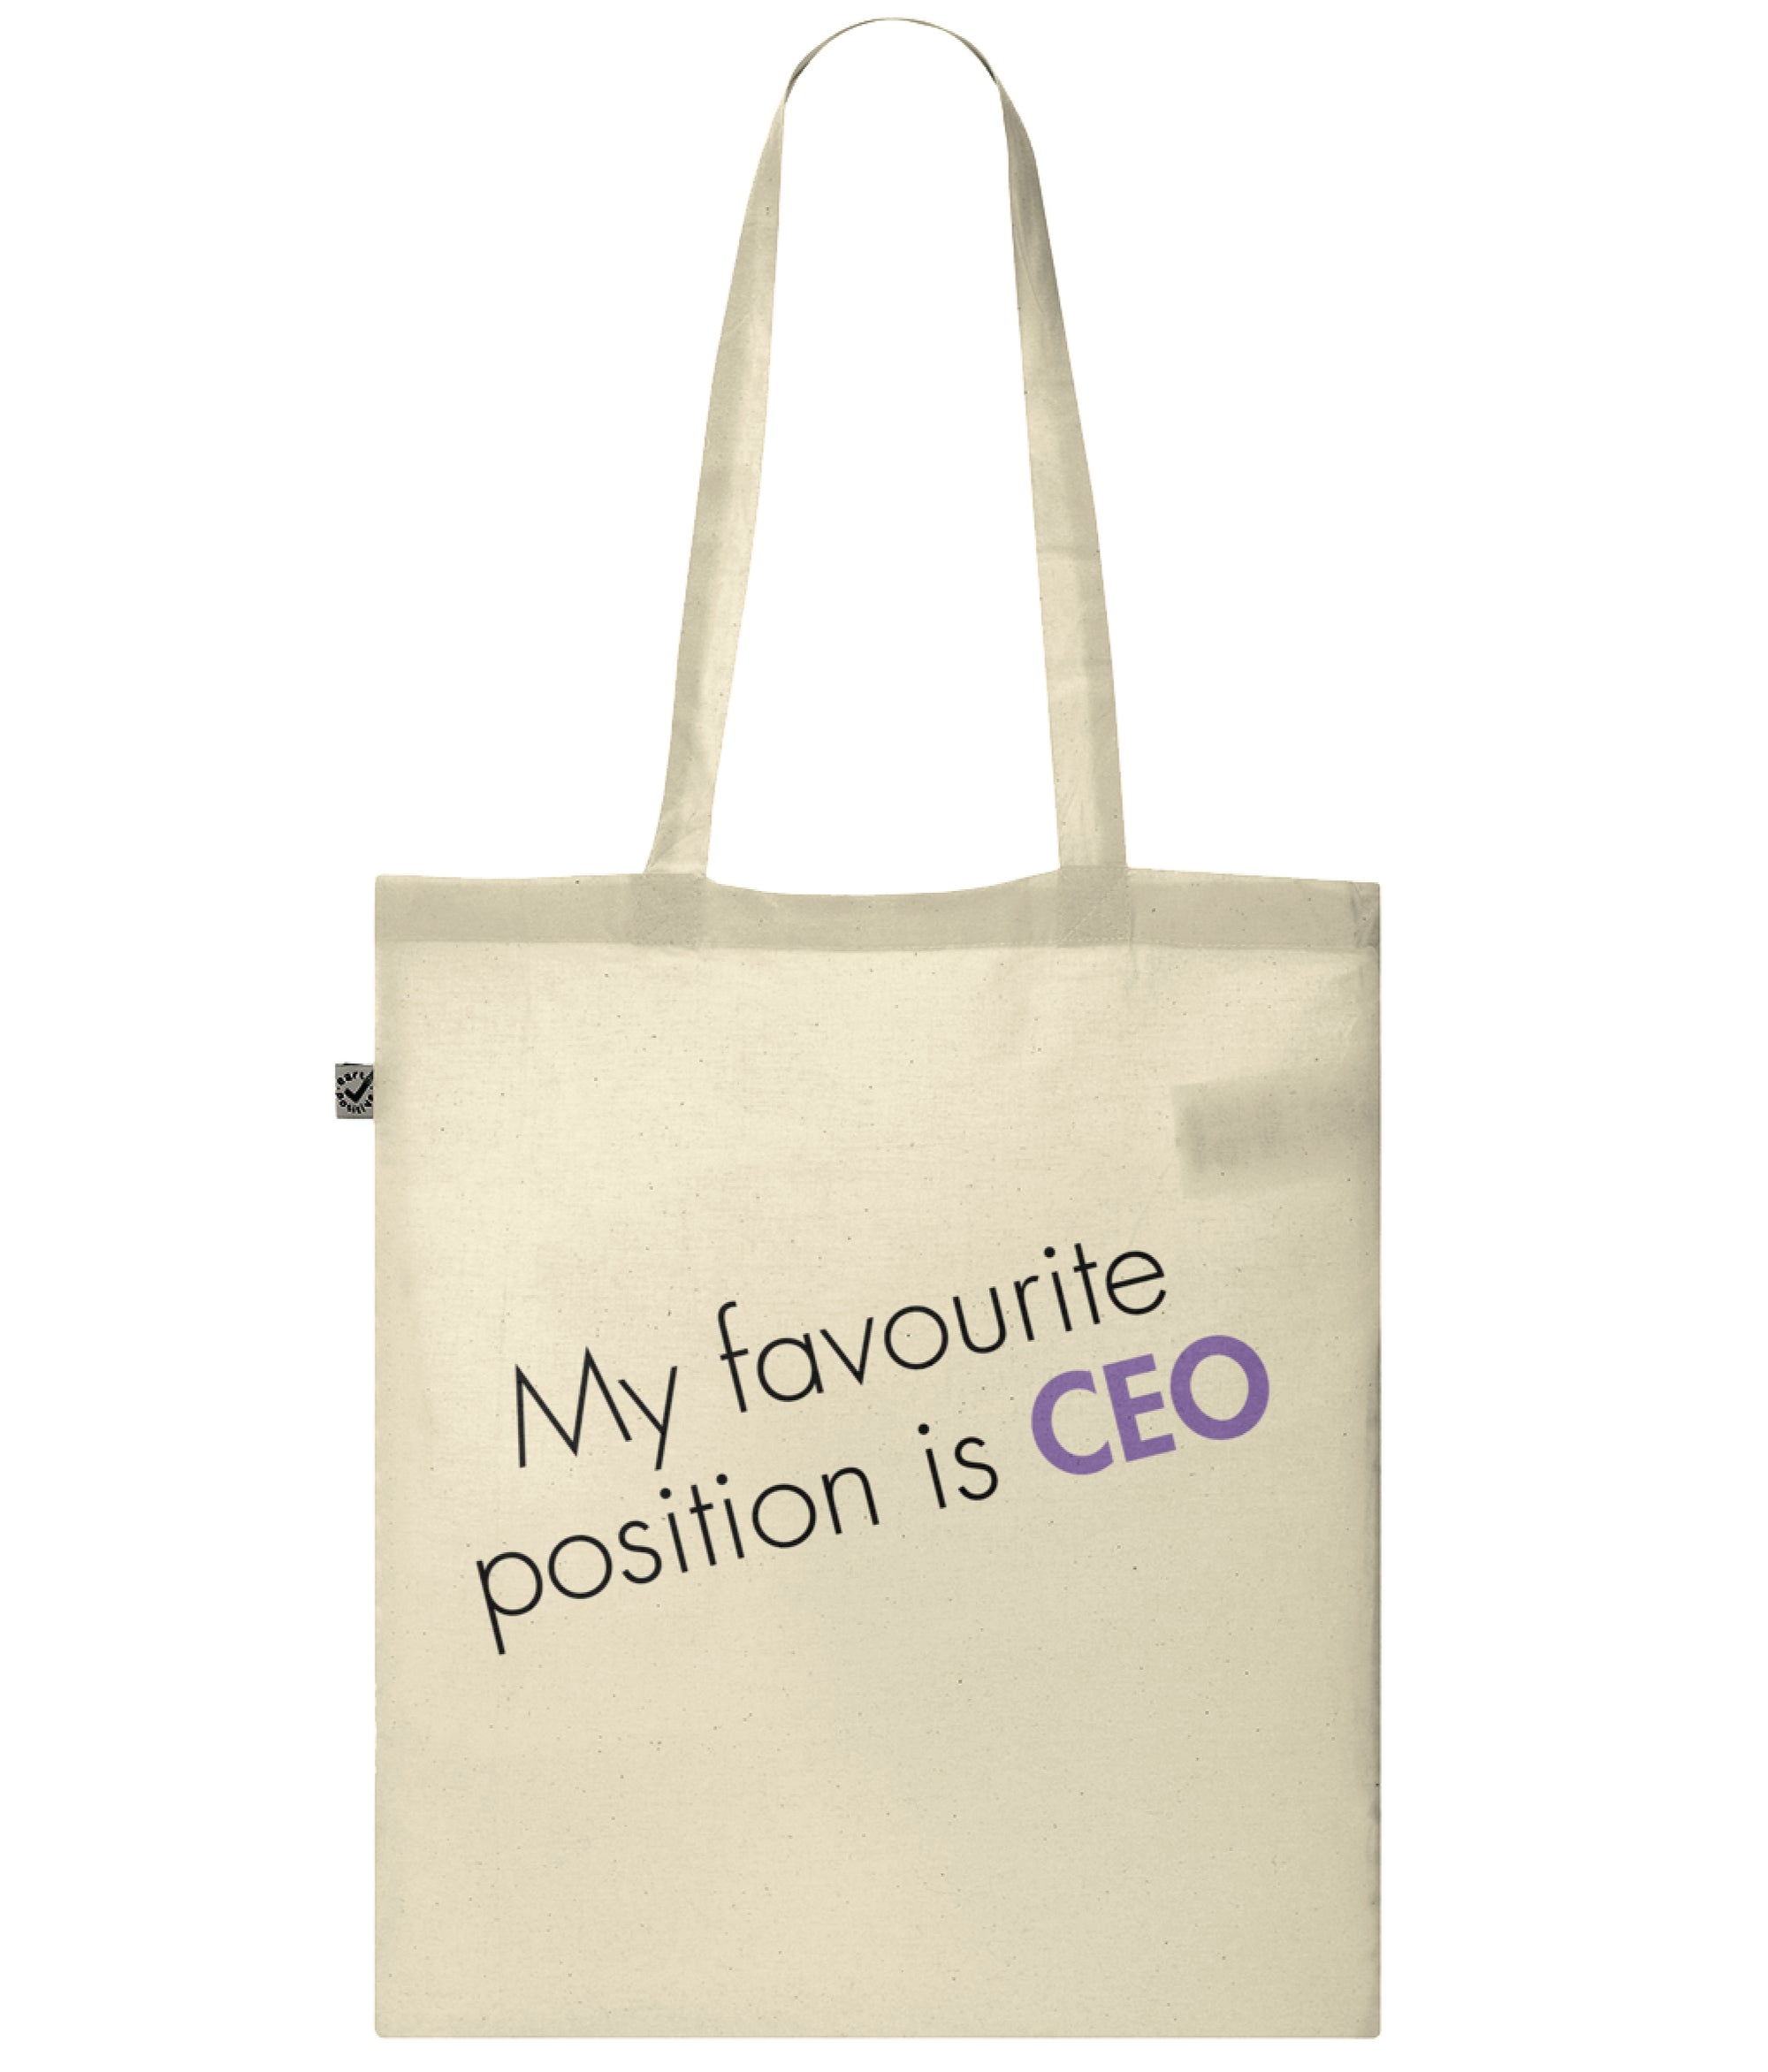 My Favourite Position Is CEO Organic Combed Cotton Tote Bag Natural